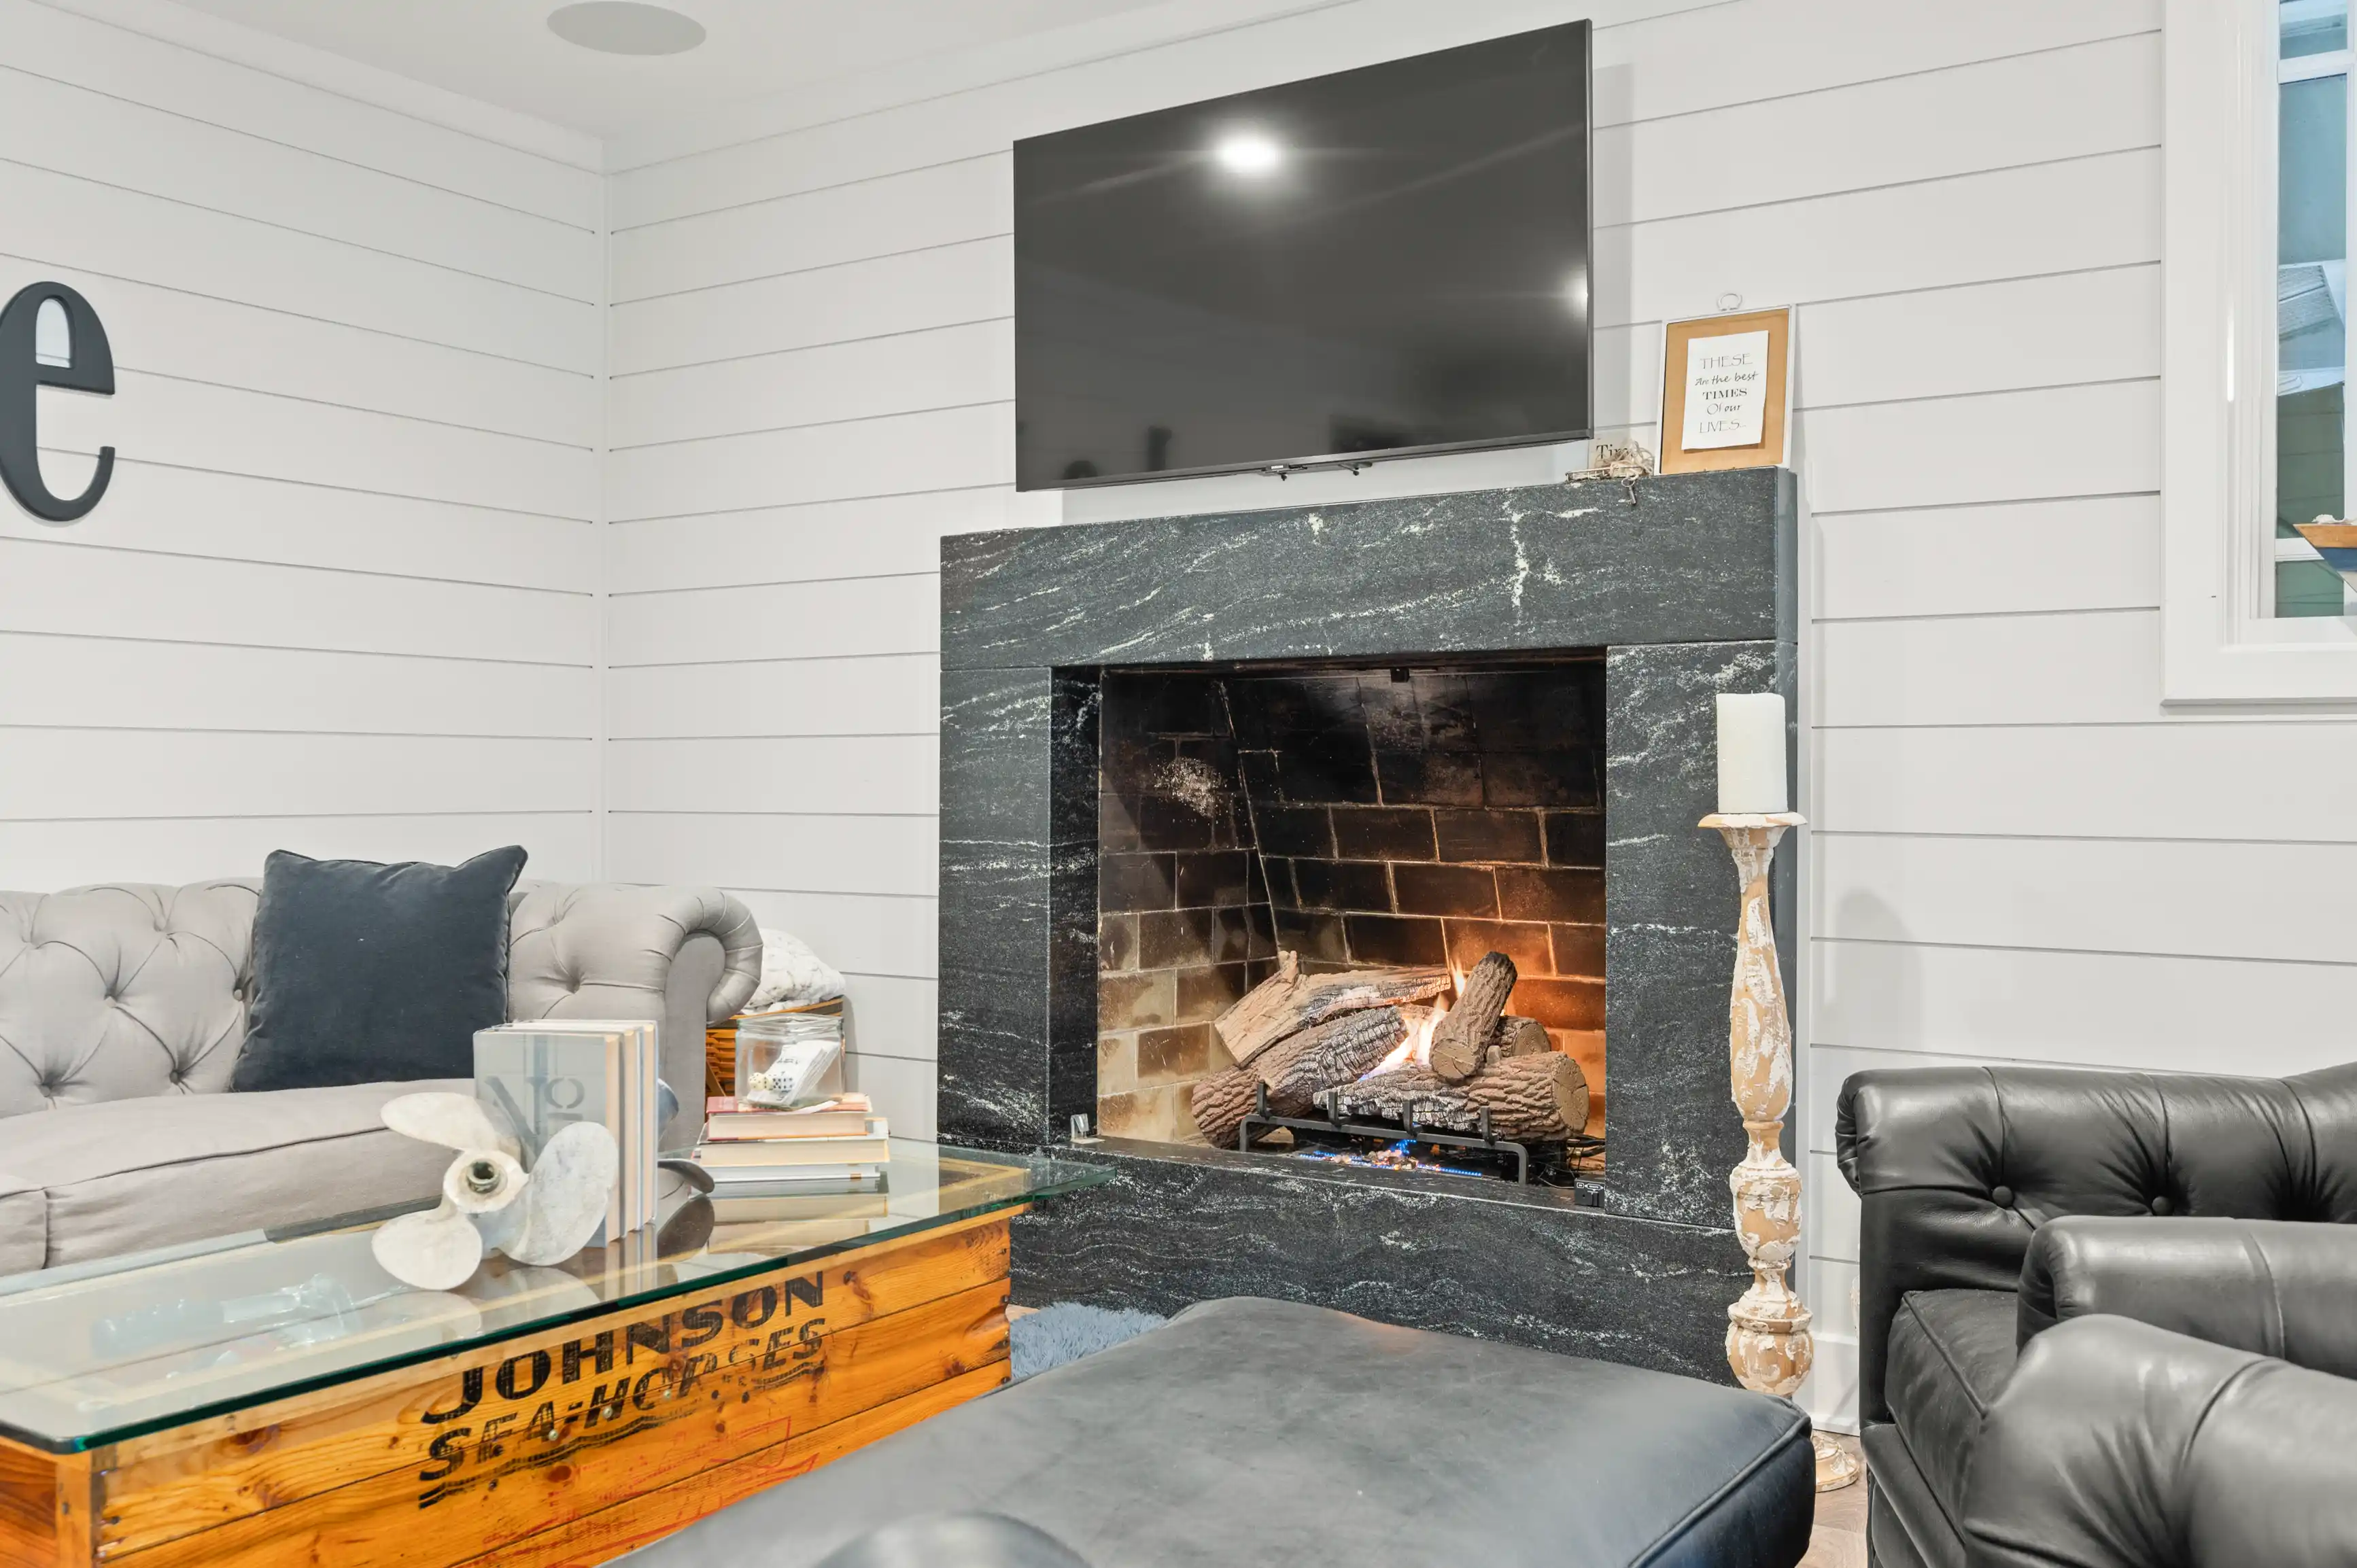 Cozy living room with a lit fireplace, grey tufted sofa, glass coffee table with propeller base, black leather armchair, and shiplap walls with mounted TV above the fireplace.